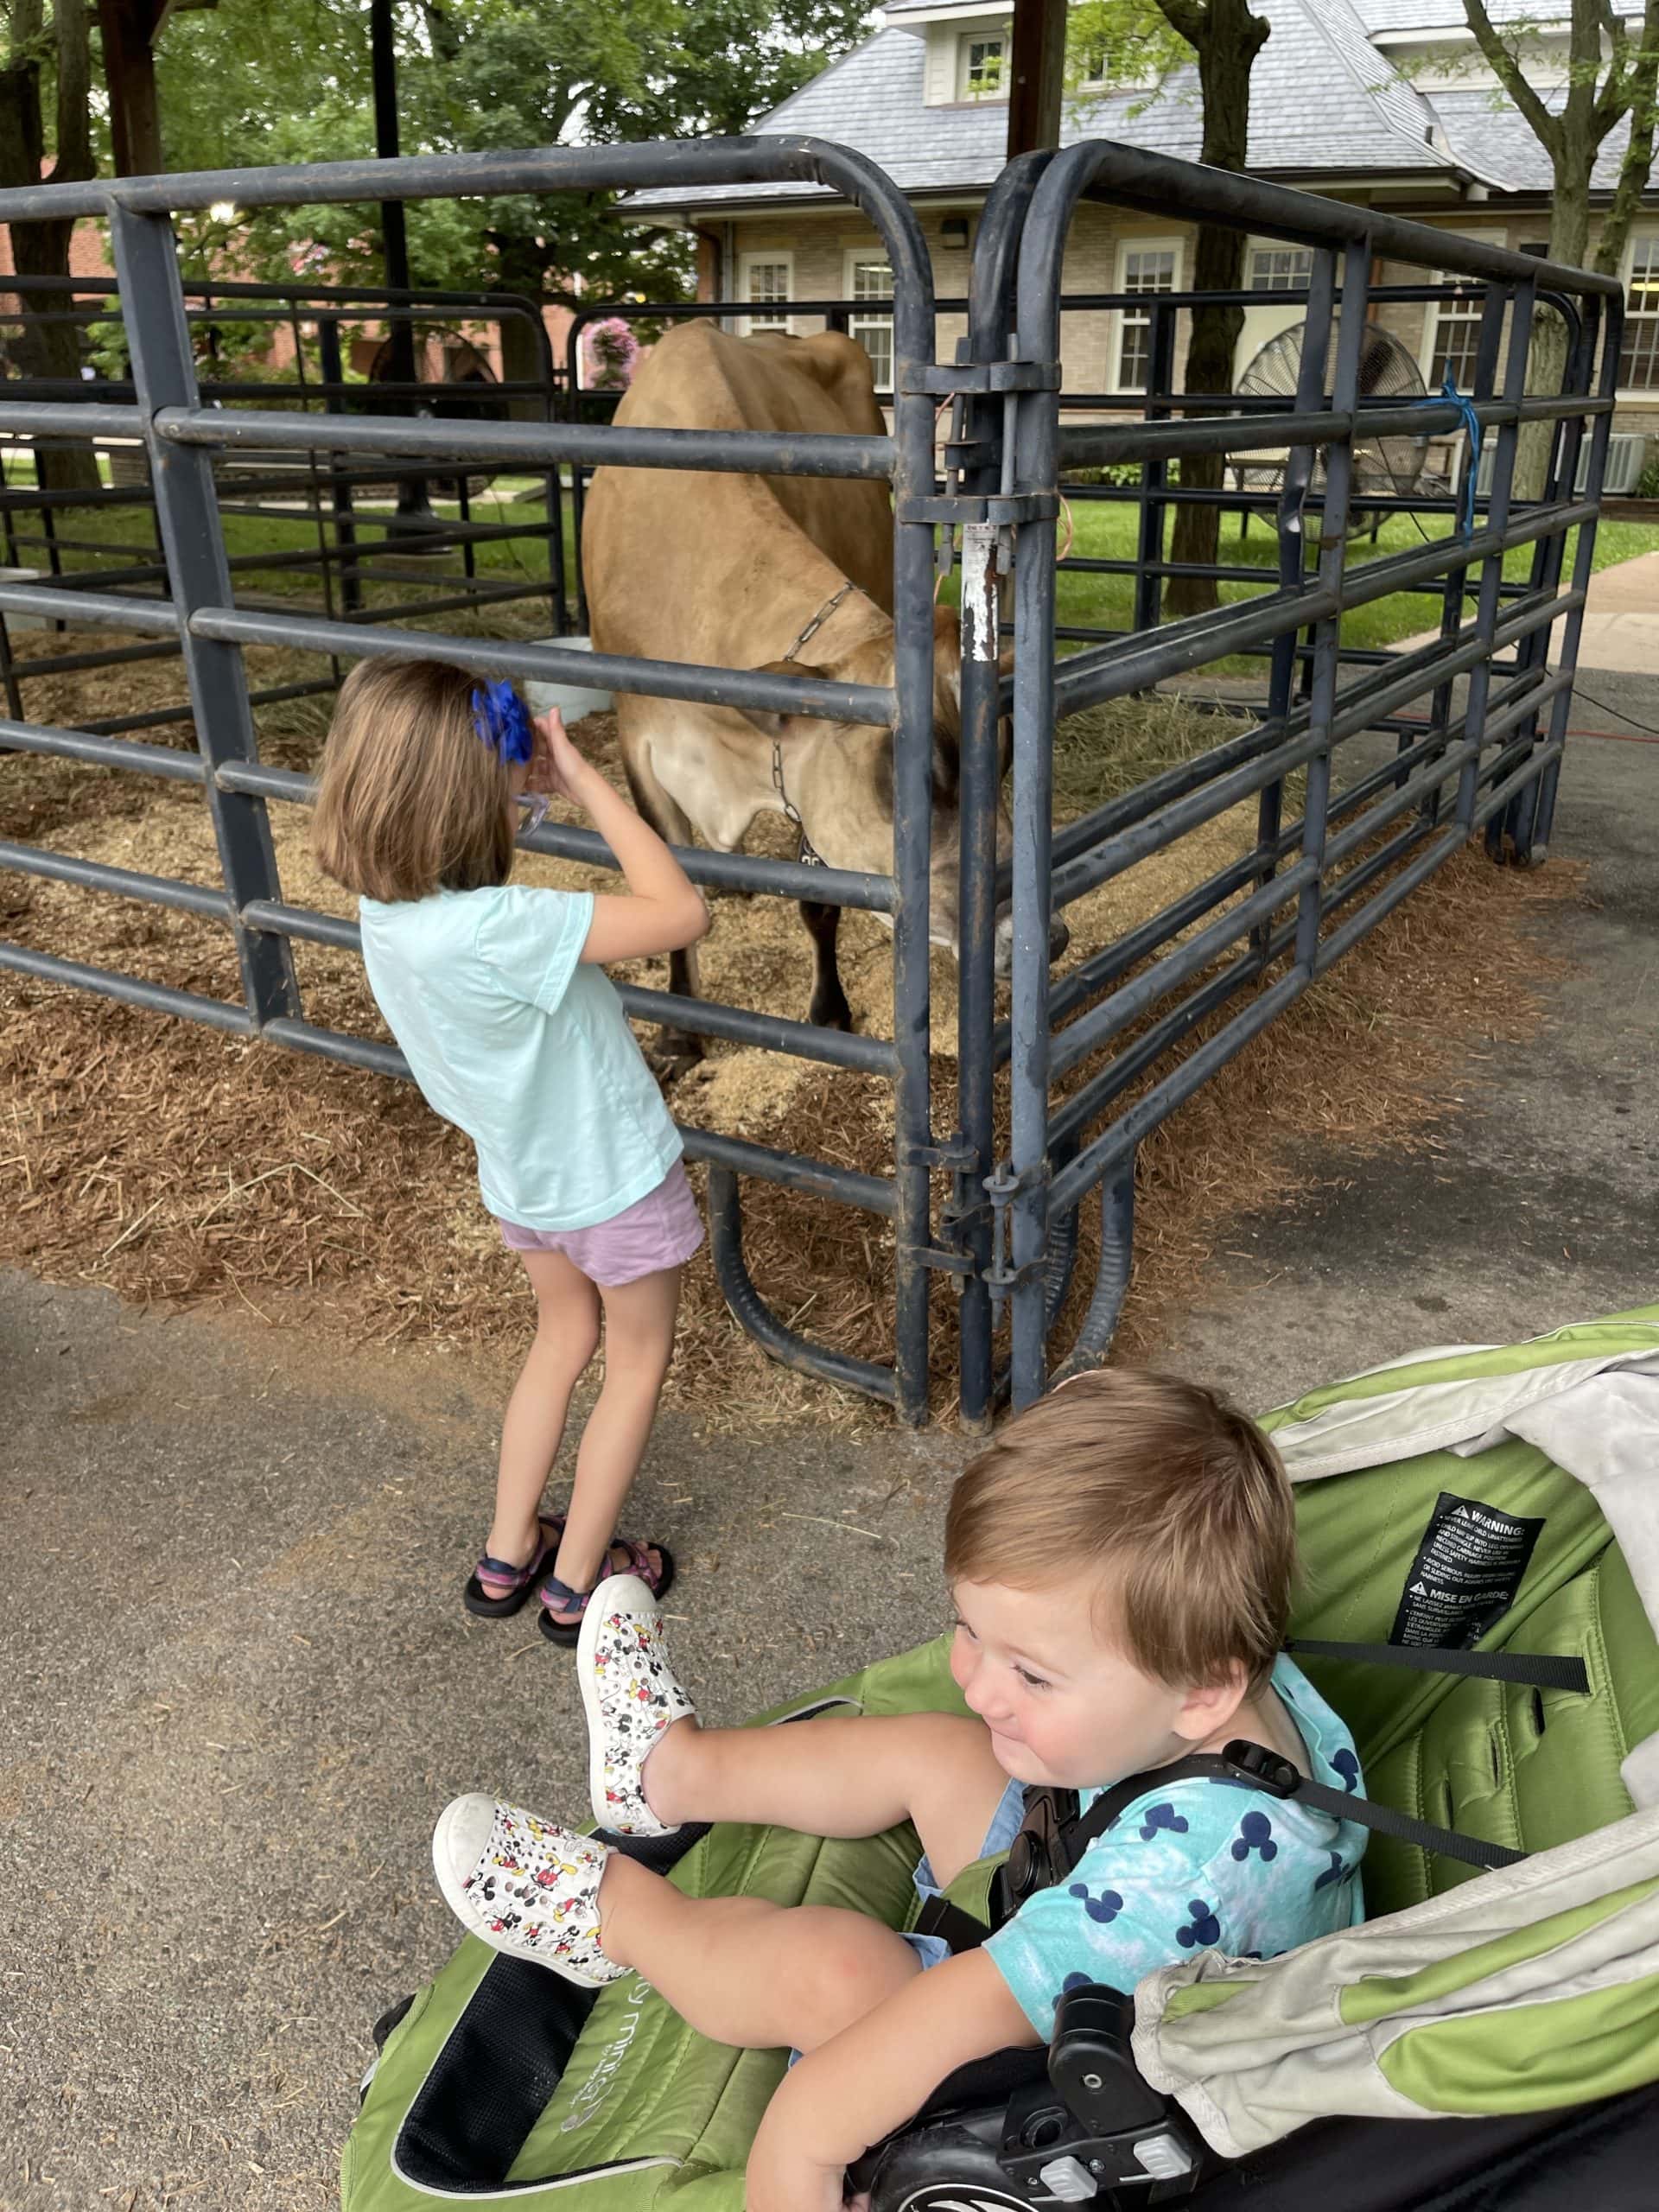 Kids petting cows at the Ohio State Fair.